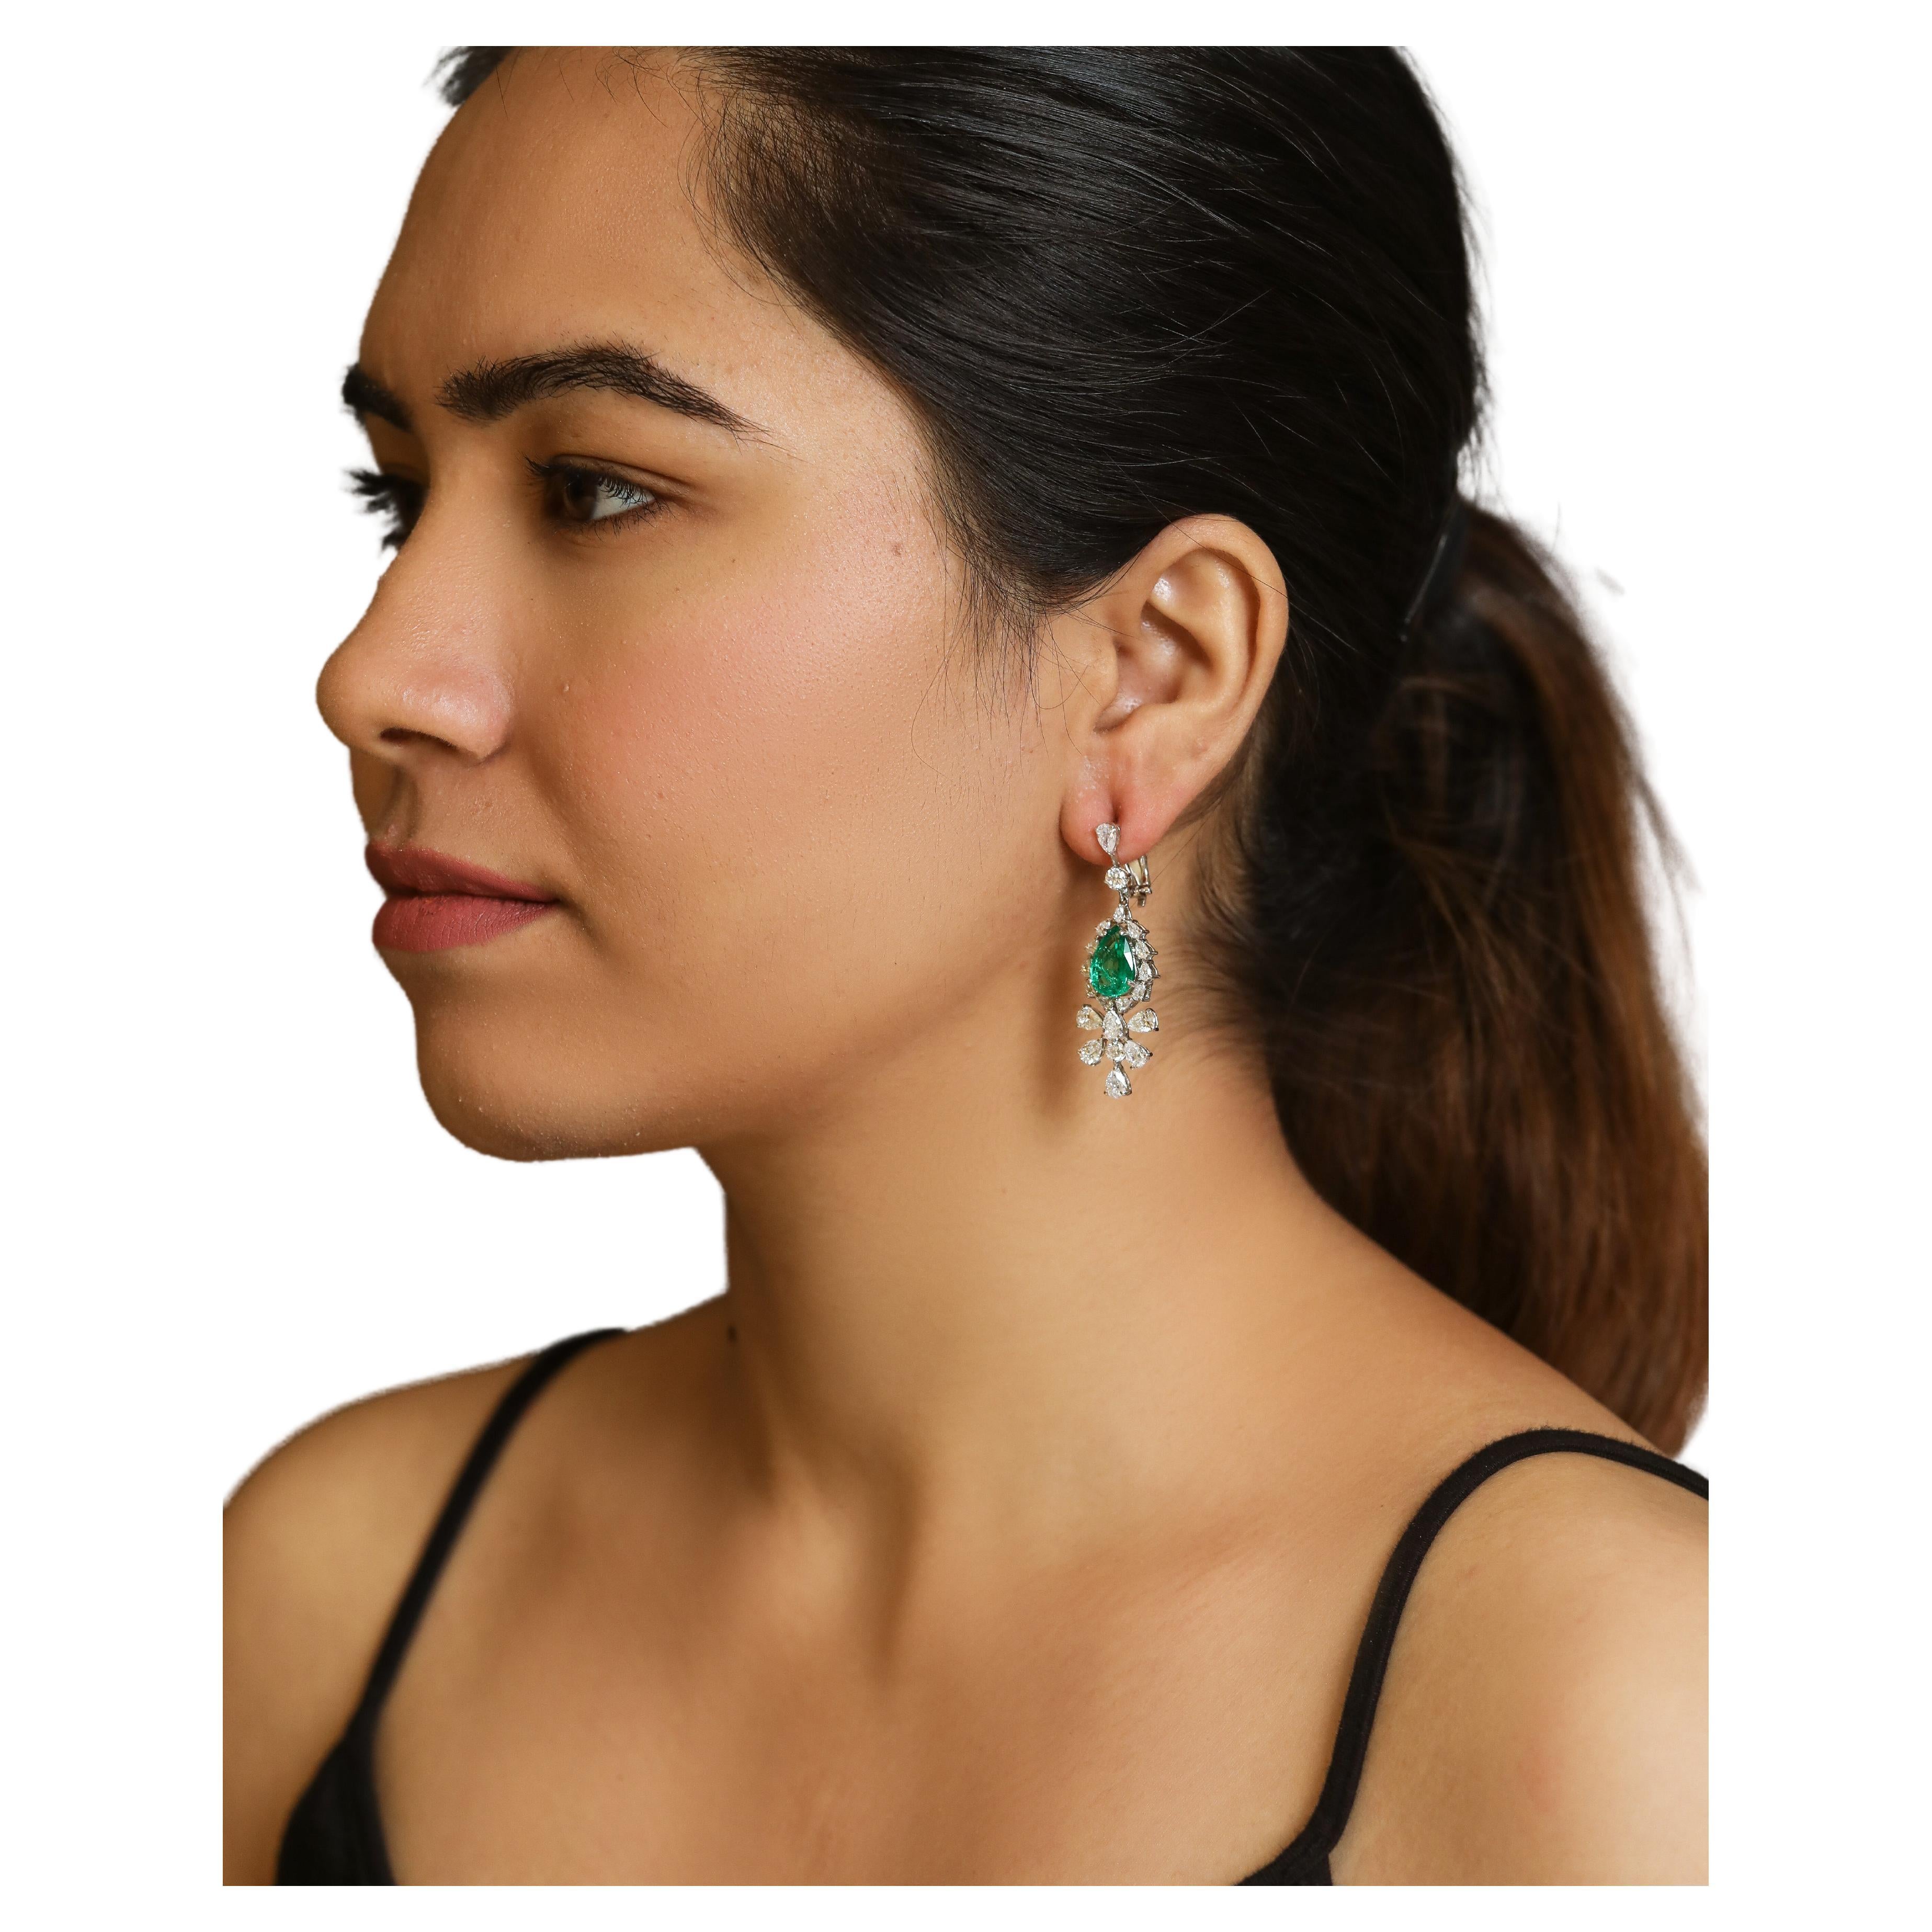 Handcrafted Earrings in 18K Gold Studded with Pear Shape and Round Diamonds with Natural Emerald.
Gold Weight - 10.465 gms

Diamond Clarity - VS
Diamond Colour - G/H

Emerald - Natural Emerald

Post and Clip System